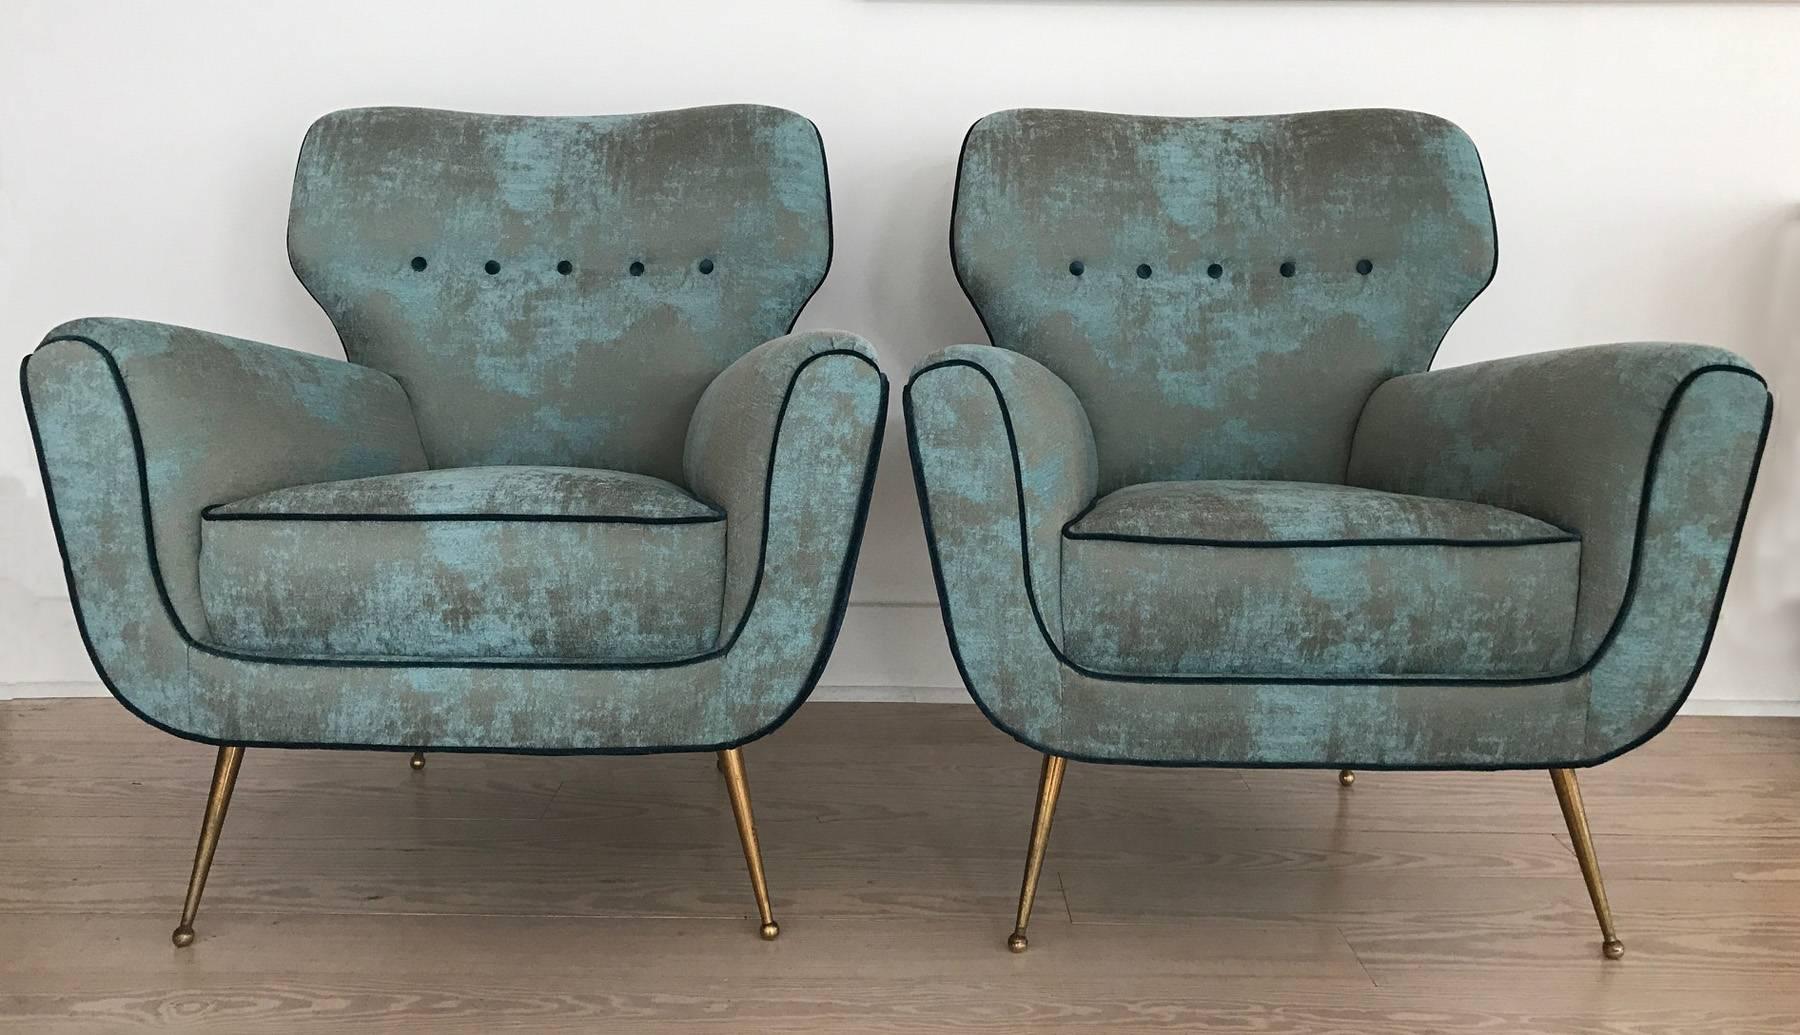 Spectacular yet comfortable Italian lounge chairs with curved silhouette frame. Newly upholstered in light blue and gold, velvet-like fabric from the period. Brass spiked legs have some patina. The chairs have been restored and reupholstered.